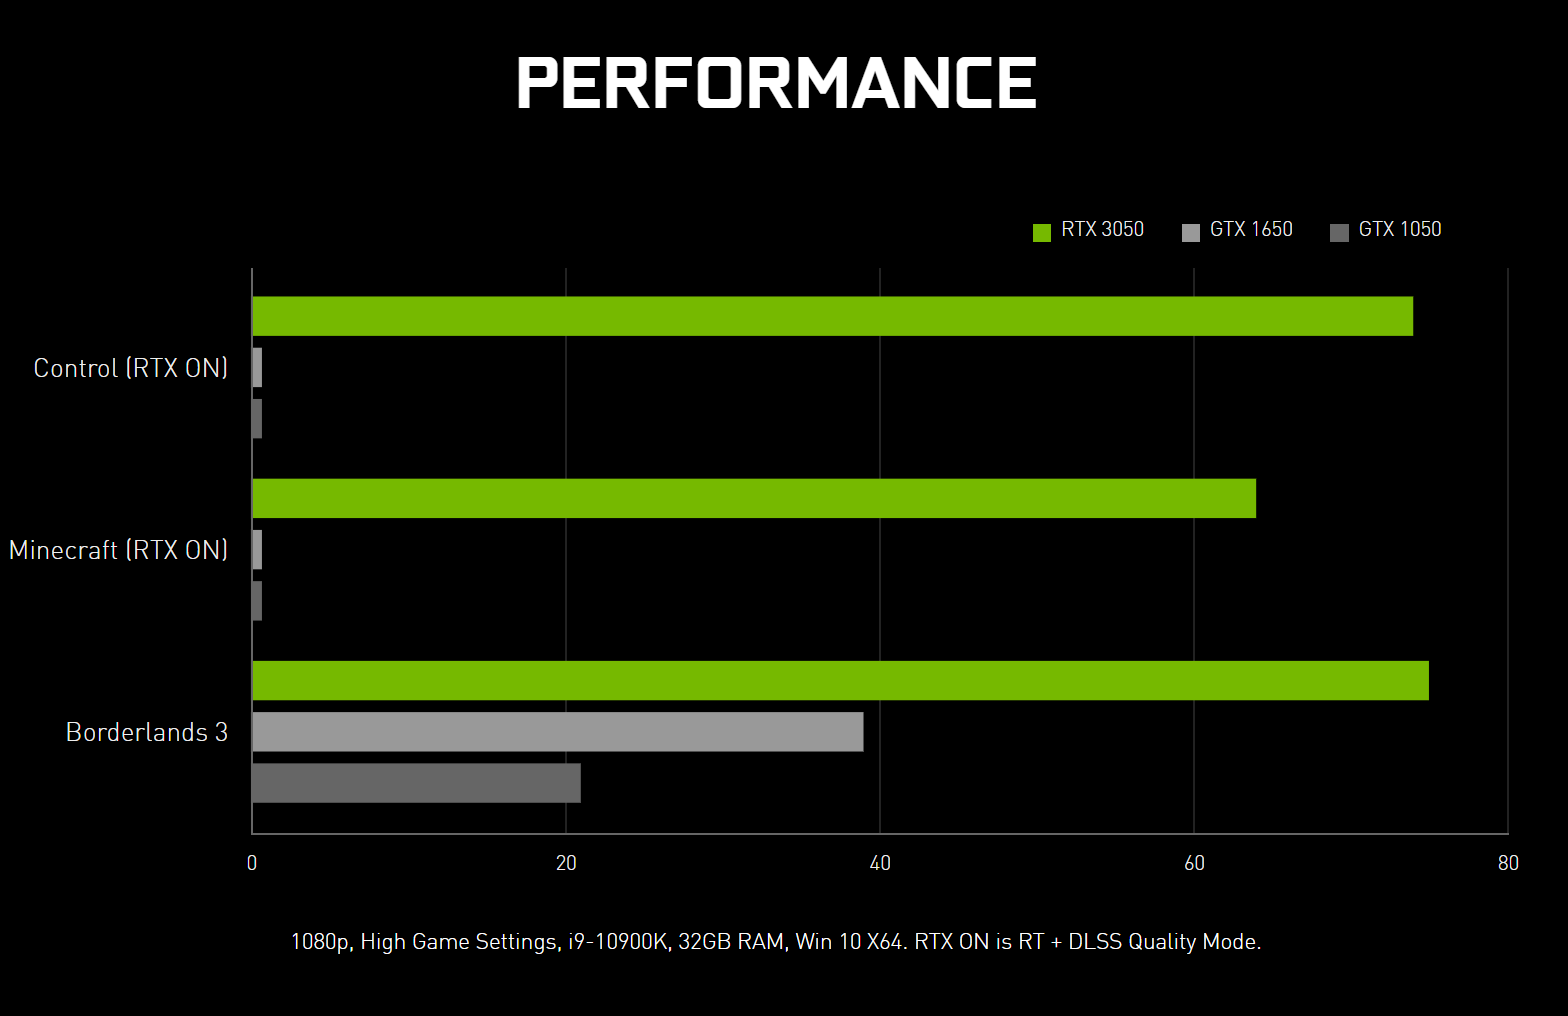 GEFORCE-RTX3050-PERFORMANCE.png